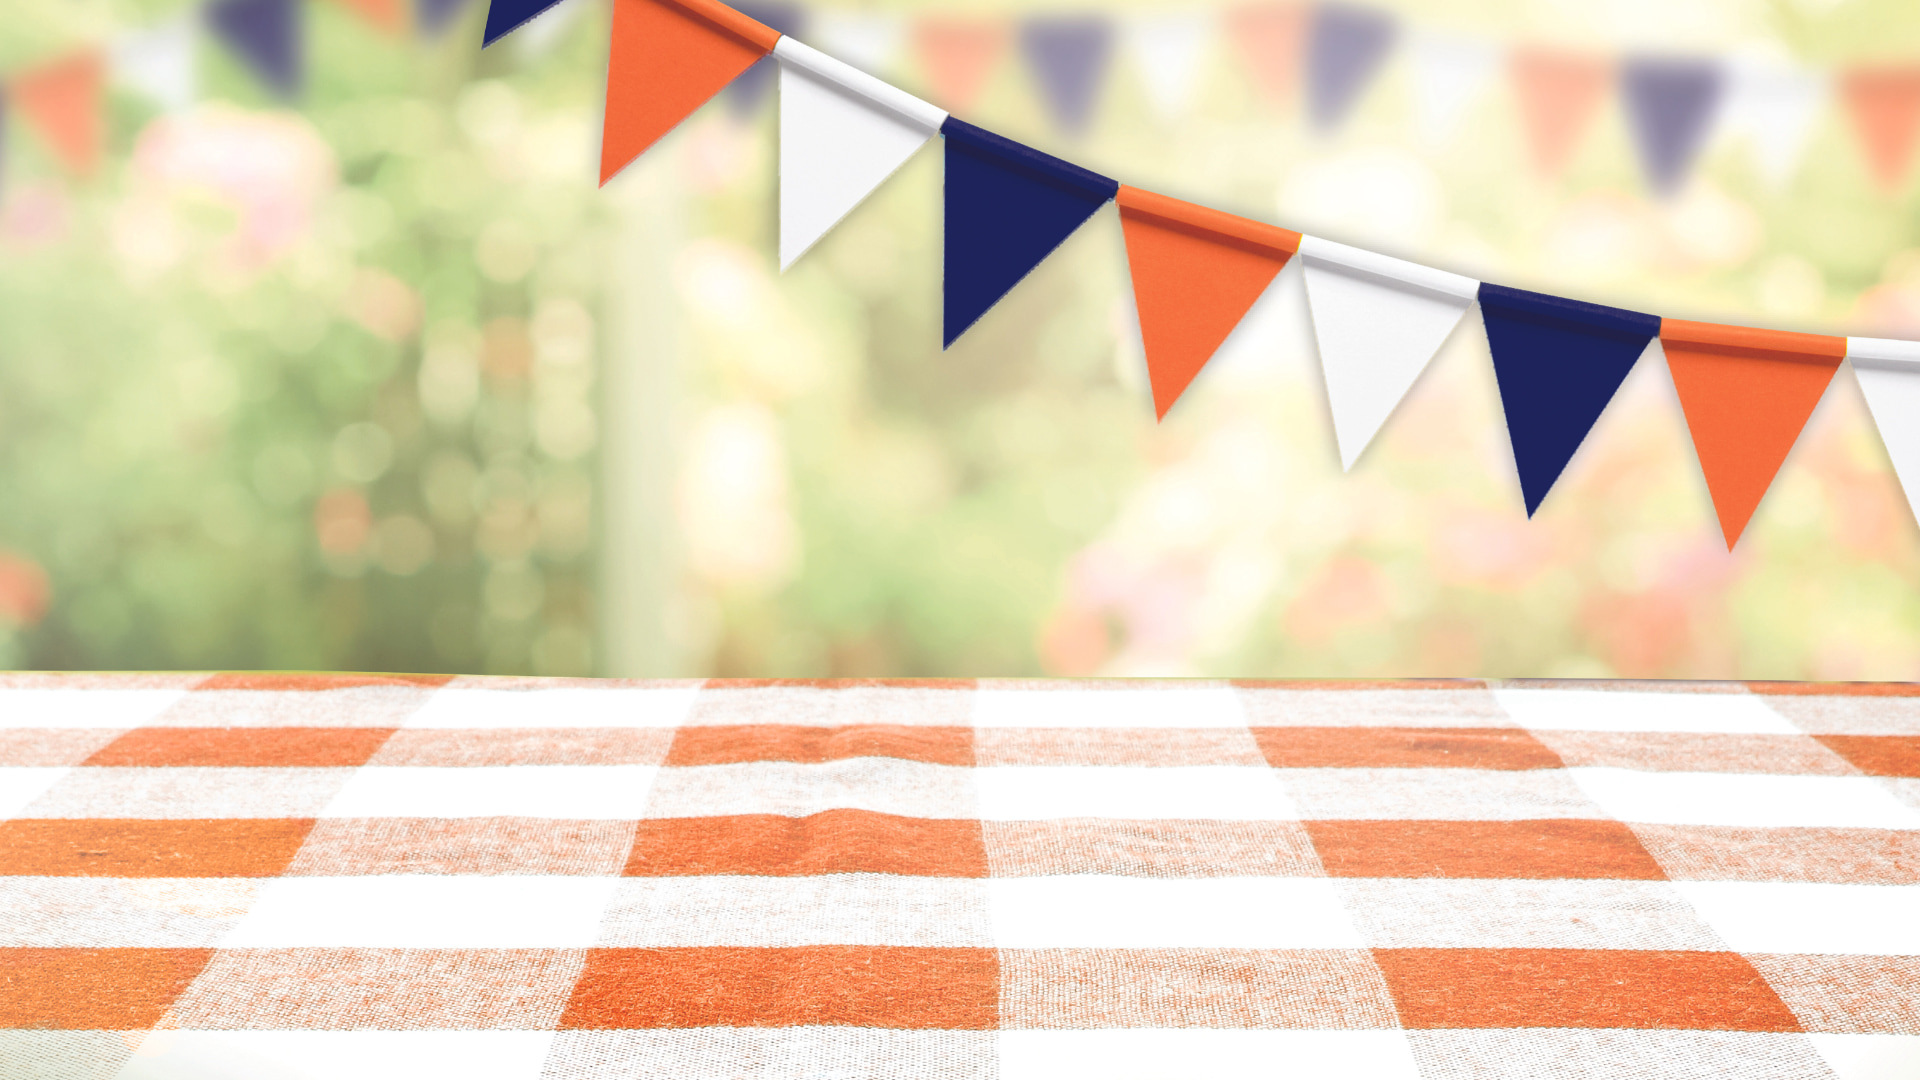 Orange and white checked tablecloth in the foreground, outdoors green blurry scene in the background, and bunting across the top right corner in orange, white and blue. Garden fete scene.